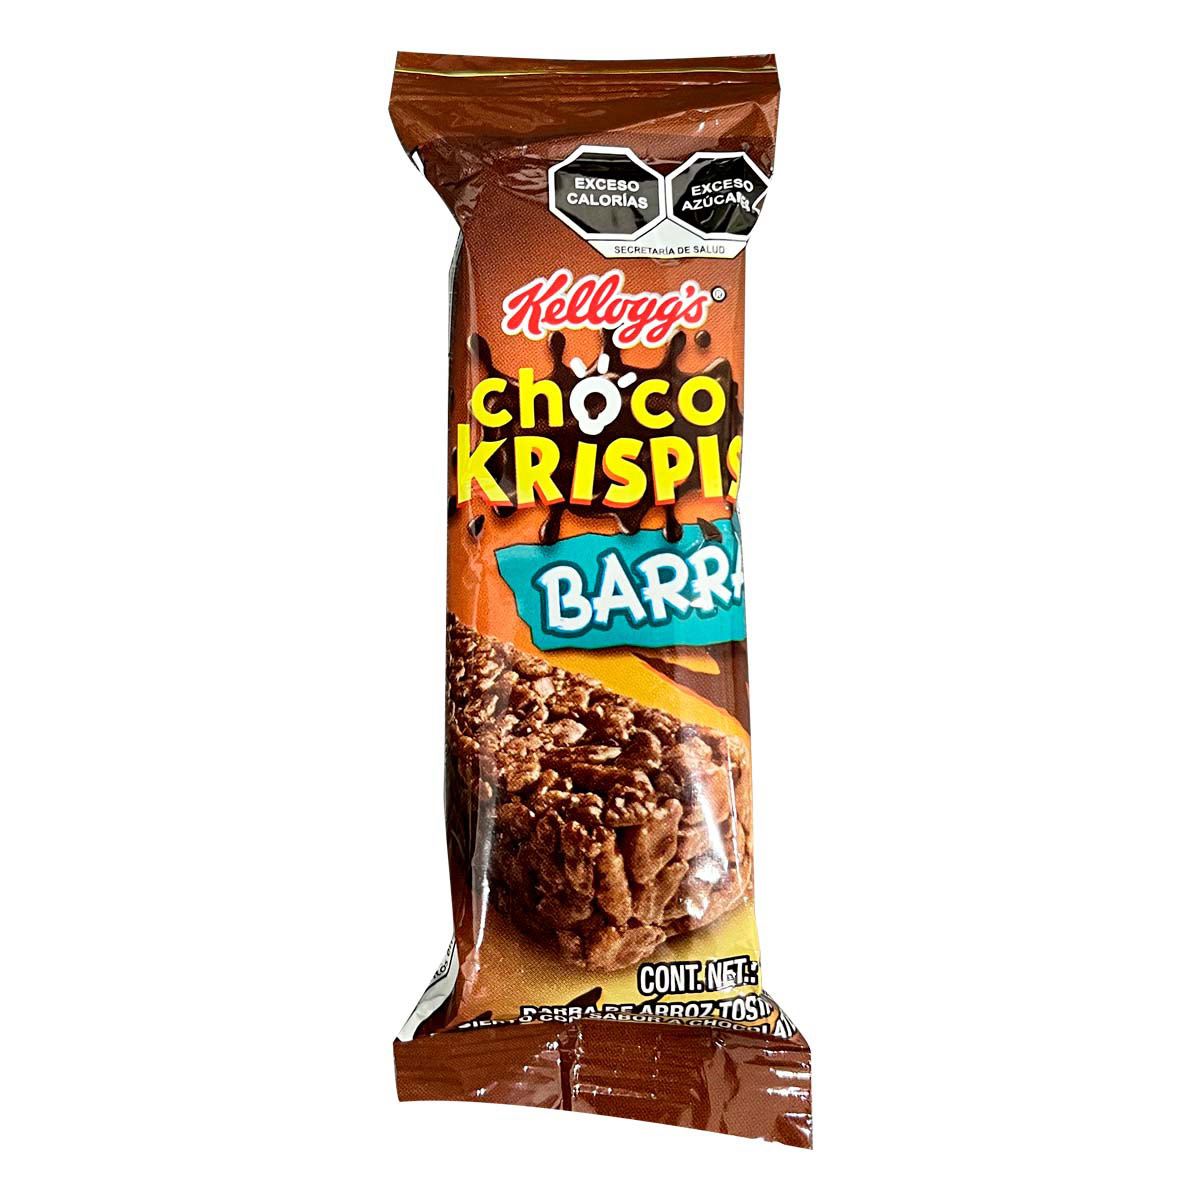 Barr cereal choco